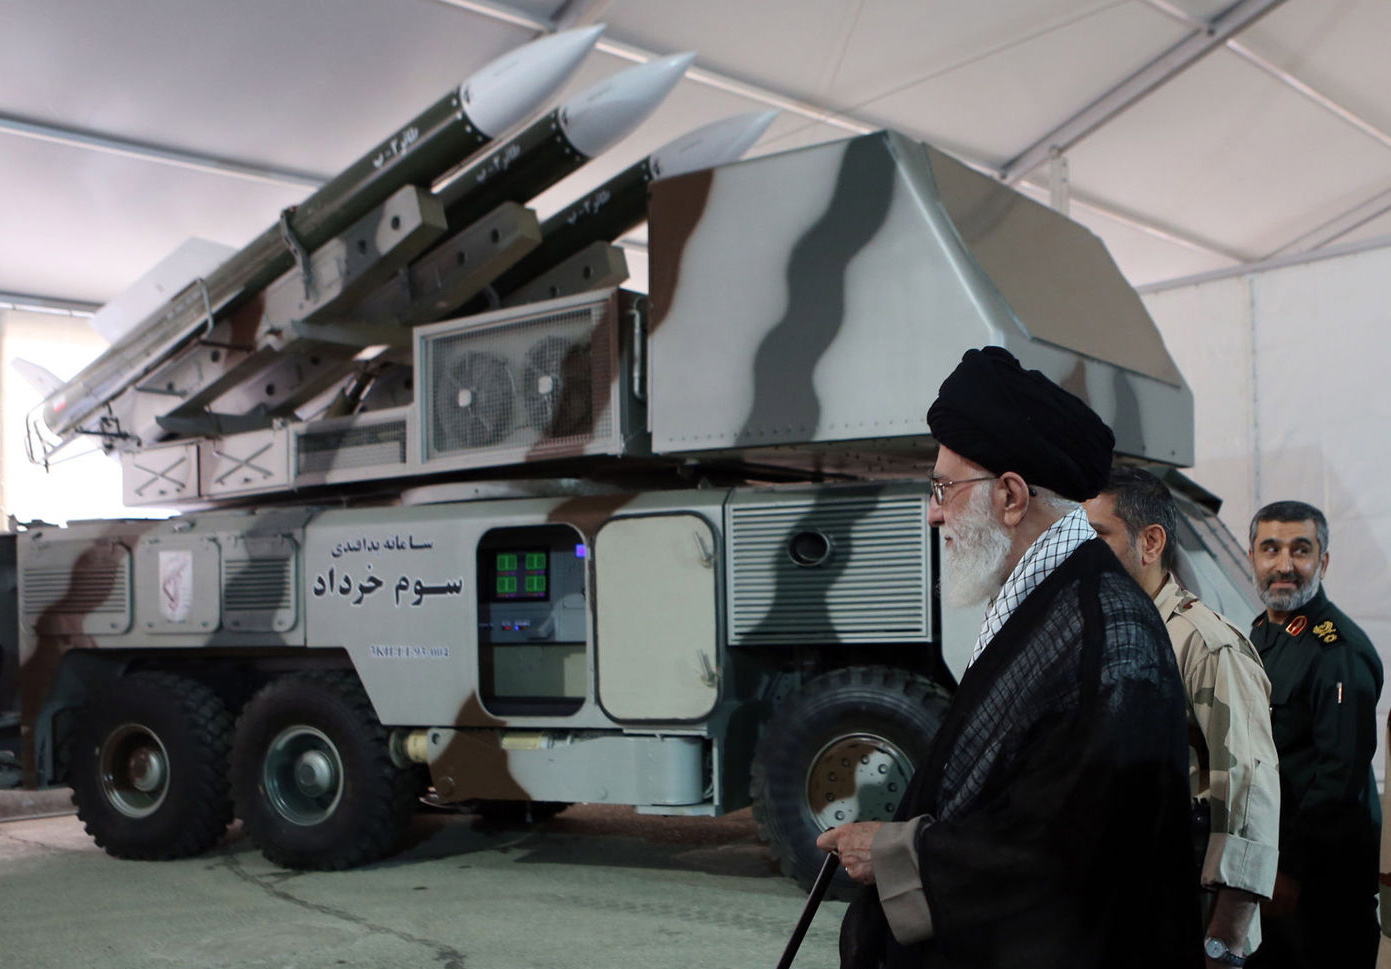 epa07662745 A handout file picture made available by Iranian Supreme Leader Office shows Iranian Supreme Leader Ali Khamenei next to Khordad-3 missile system during a revolutionary guard air force achievement exhibition in Tehran, 11 May 2014 (issued 21 June 2019). Media reported on 20 June 2019 that a US surveillance drone RQ-4A was shot down by an Iranian surface-to-air missile. Iran claims that the drone was in Iran airspace as US says the drone was flying over international water.  EPA/HO HANDOUT  HANDOUT EDITORIAL USE ONLY/NO SALES